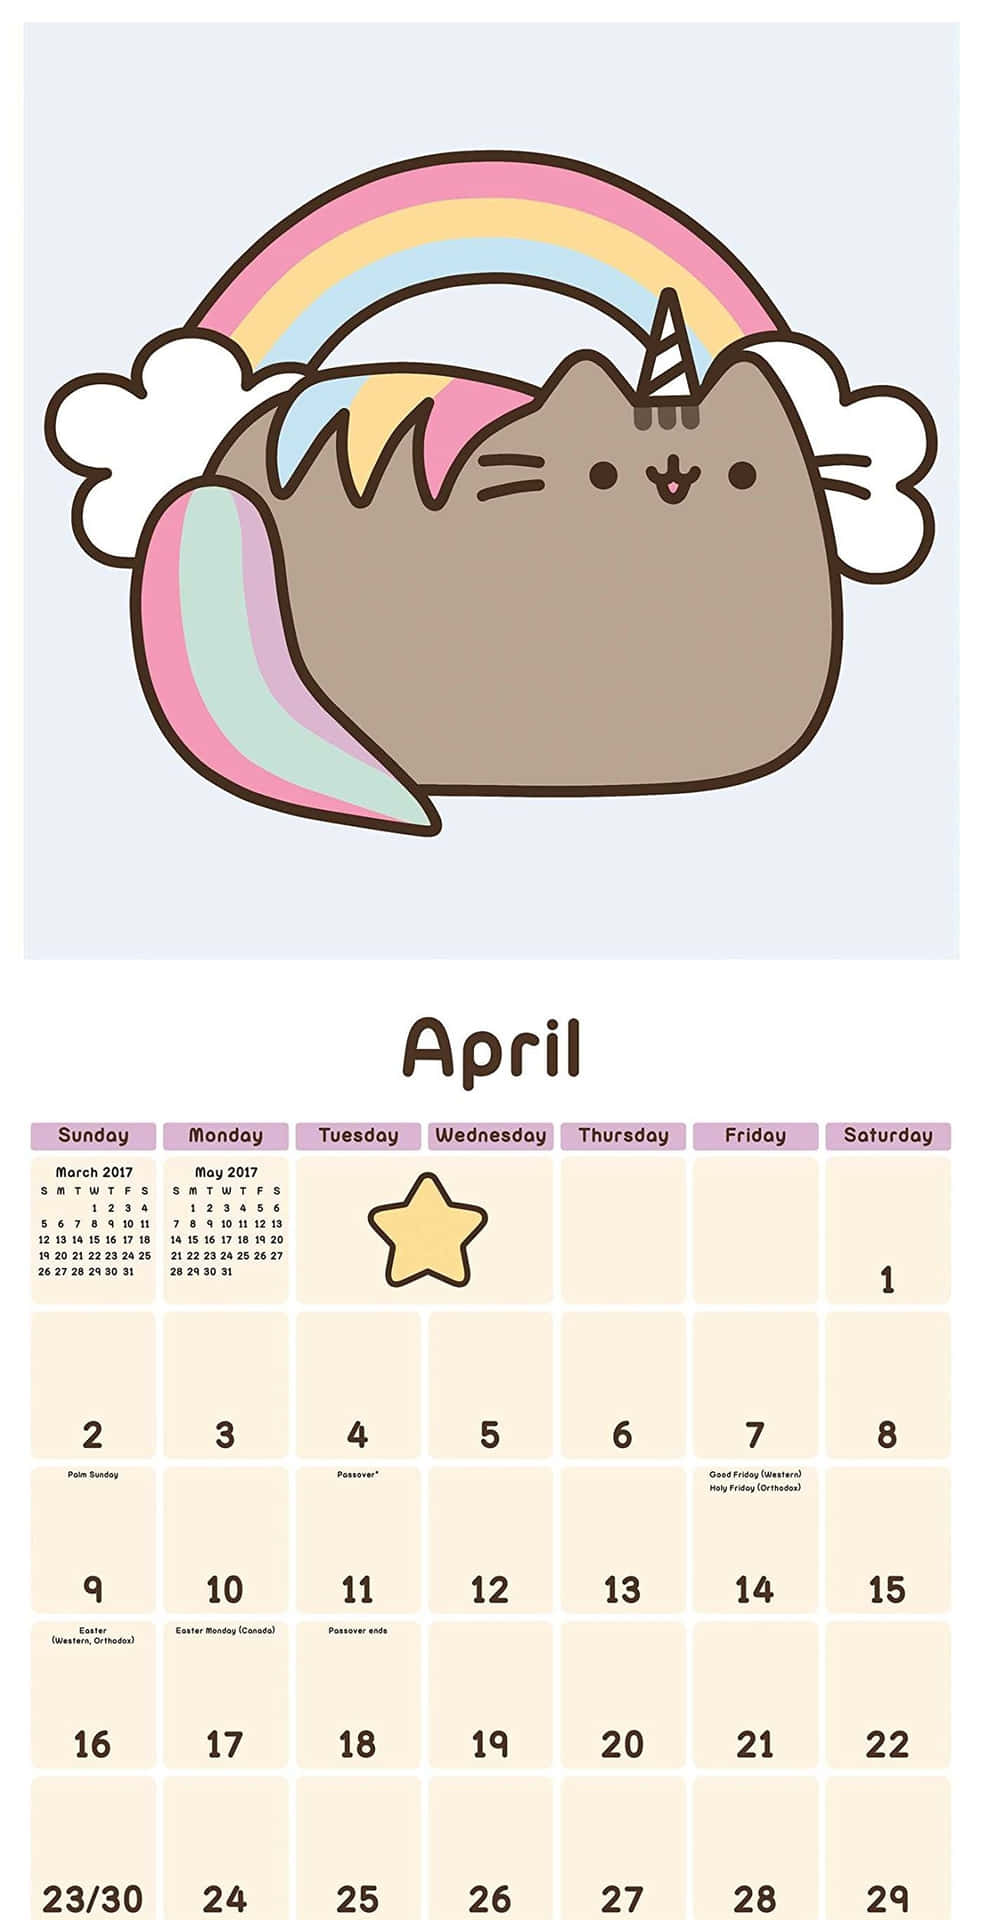 Image  Adorable Pusheen in a Kawaii Outfit Wallpaper